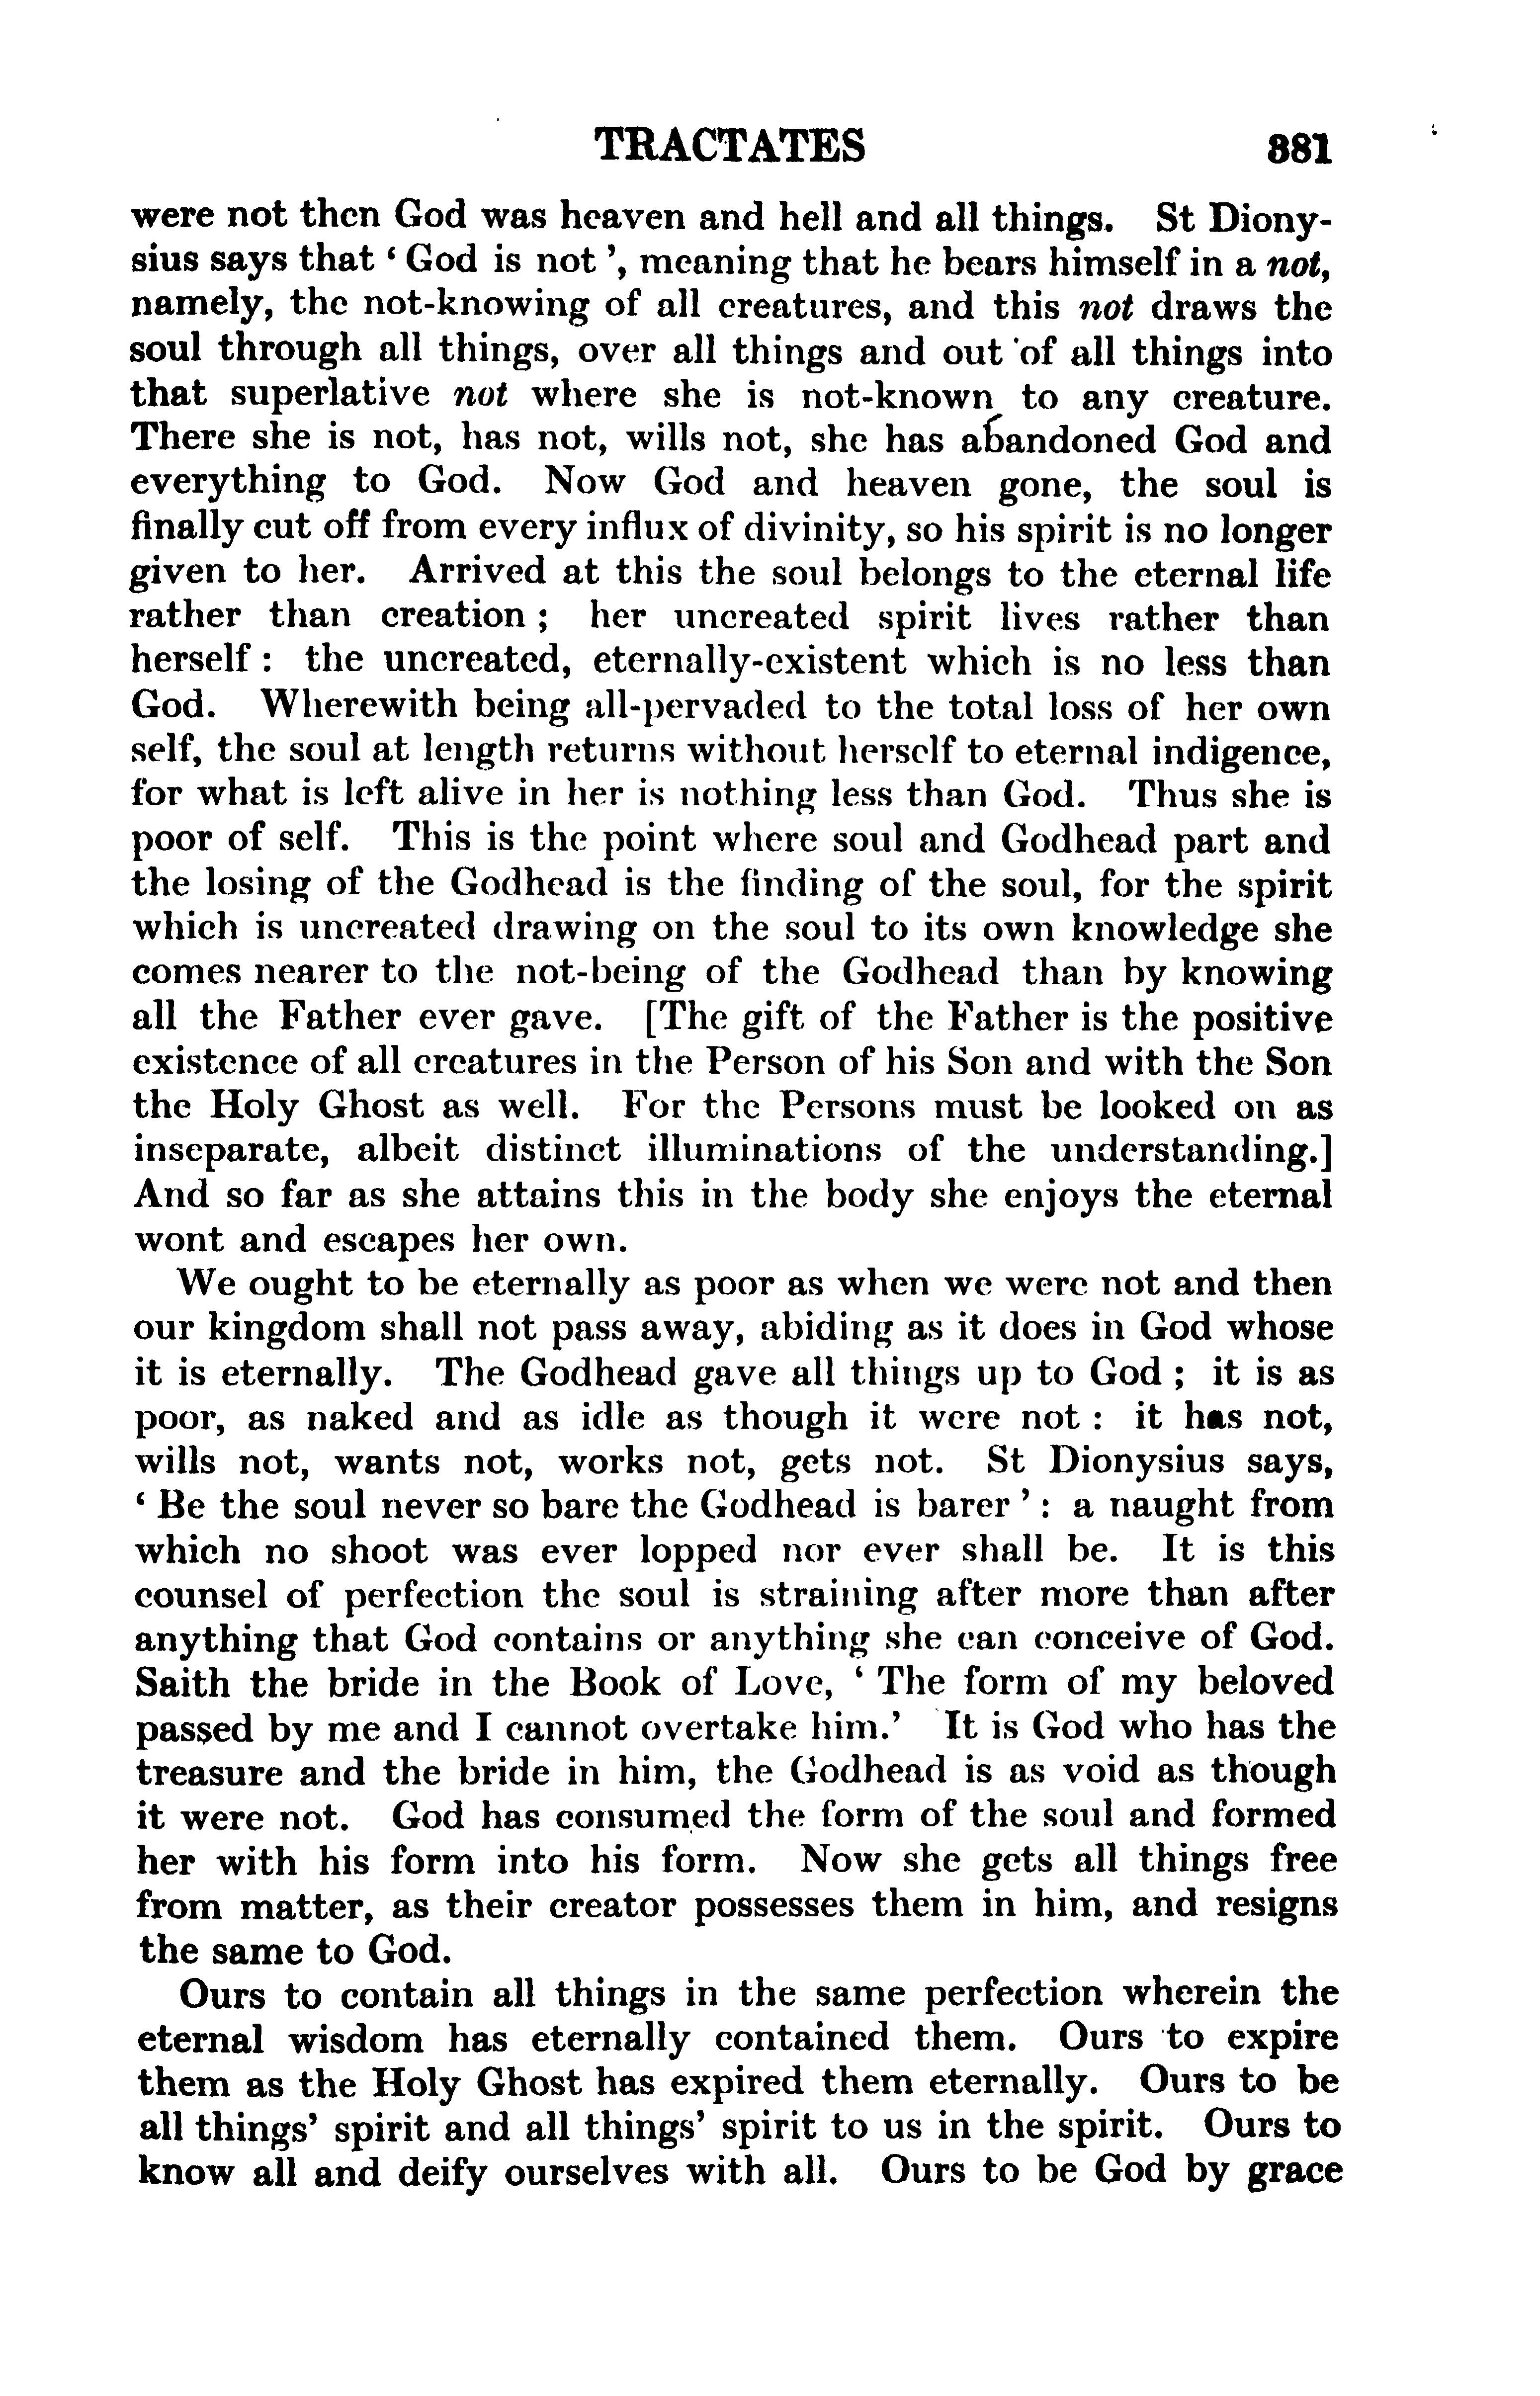 Image of page 0405